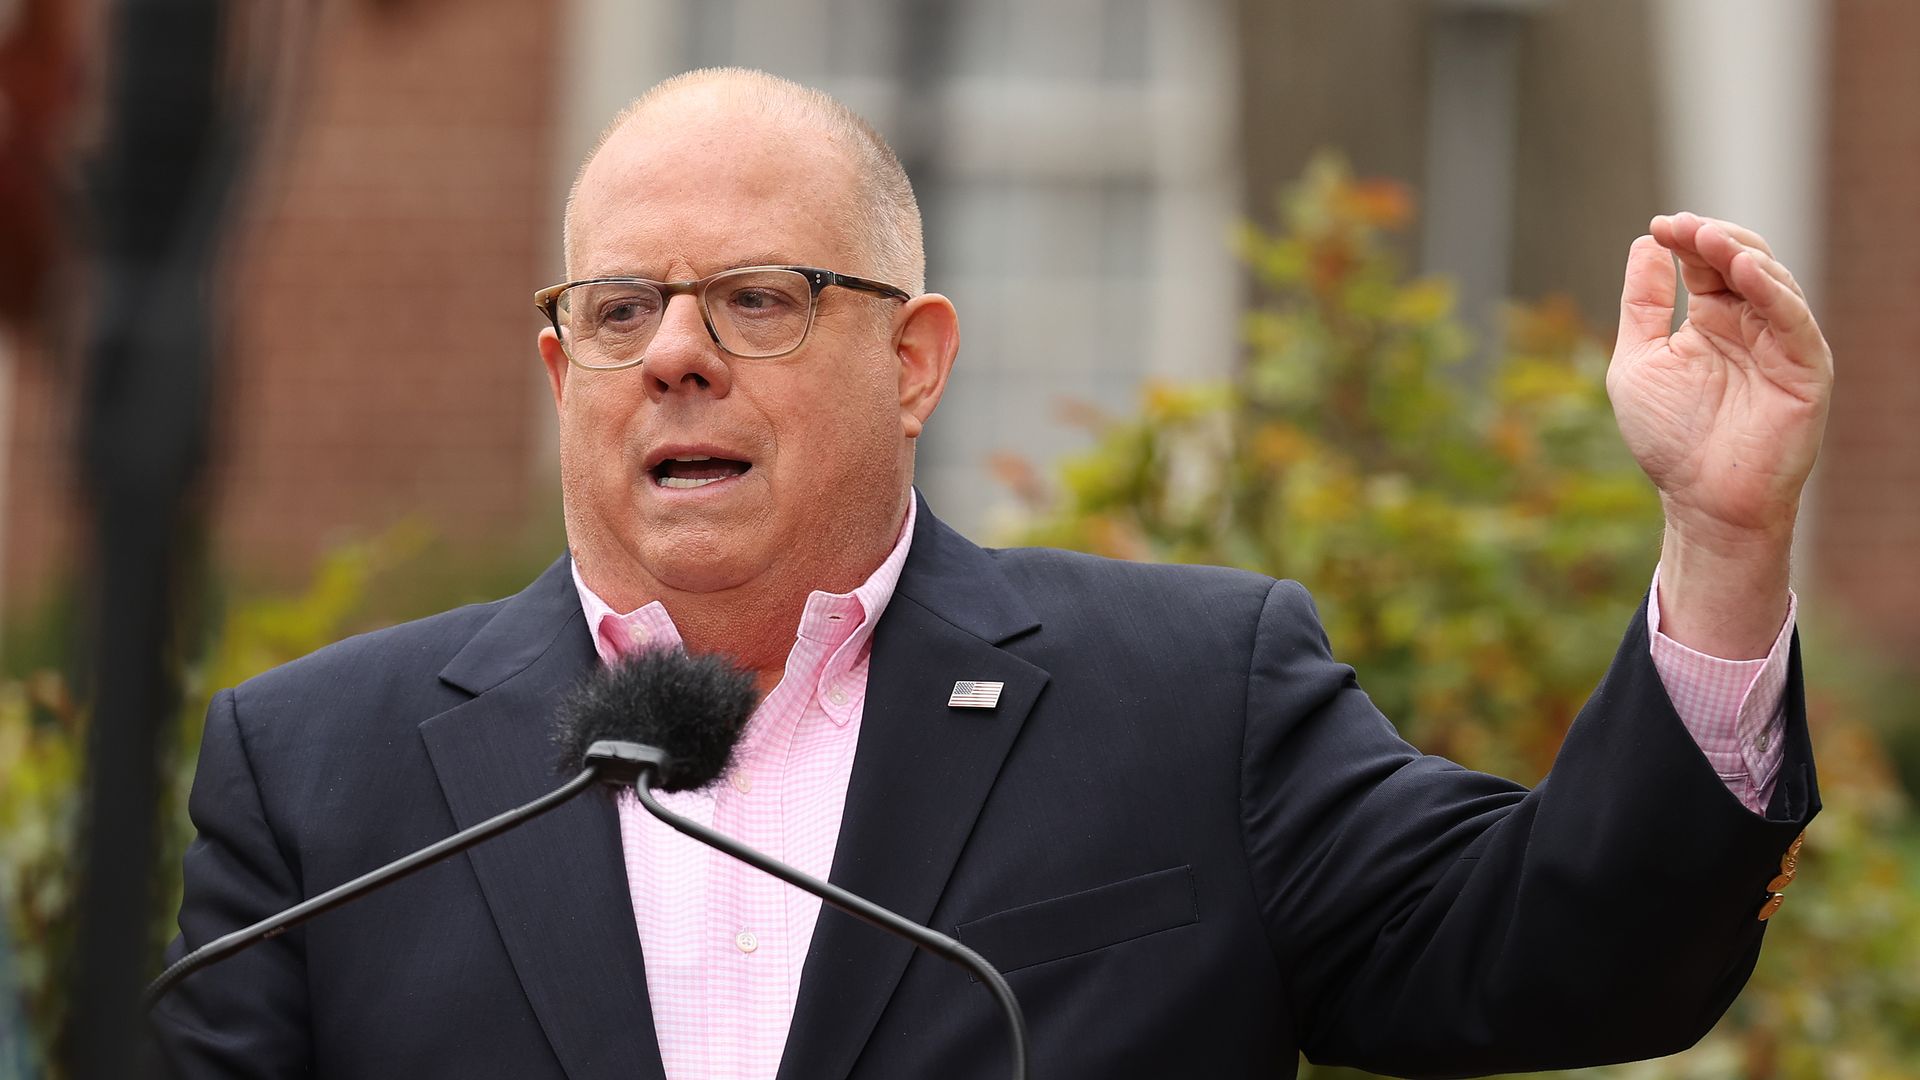 Maryland Gov. Larry Hogan (R) speaking in a news conference in Annapolis, Mayland, in April 2020.